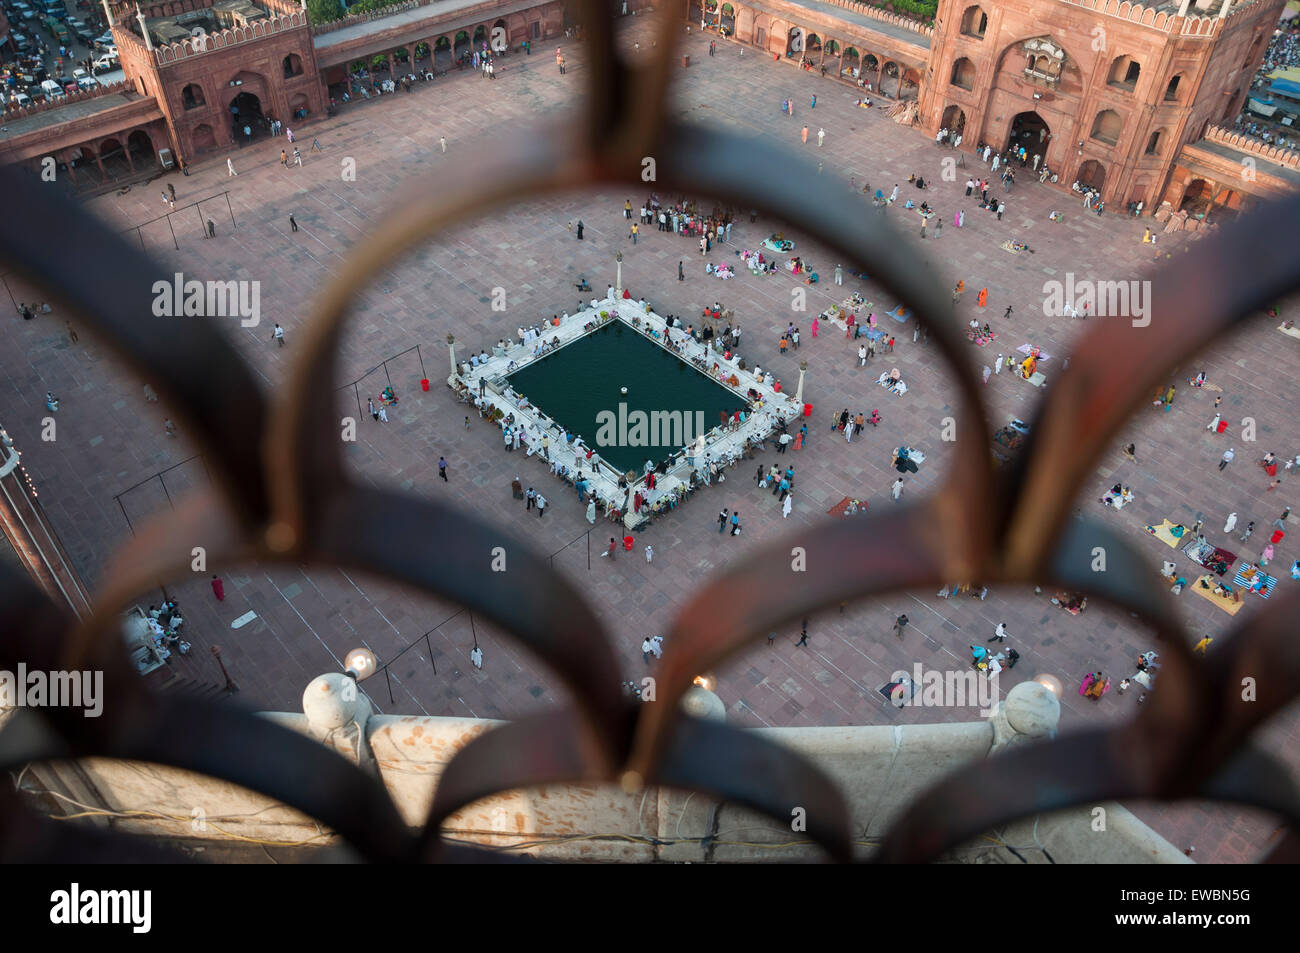 Ablution pond at the Jama Masjid mosque in old Delhi, India, seen from one of the minarets of the mosque. Stock Photo